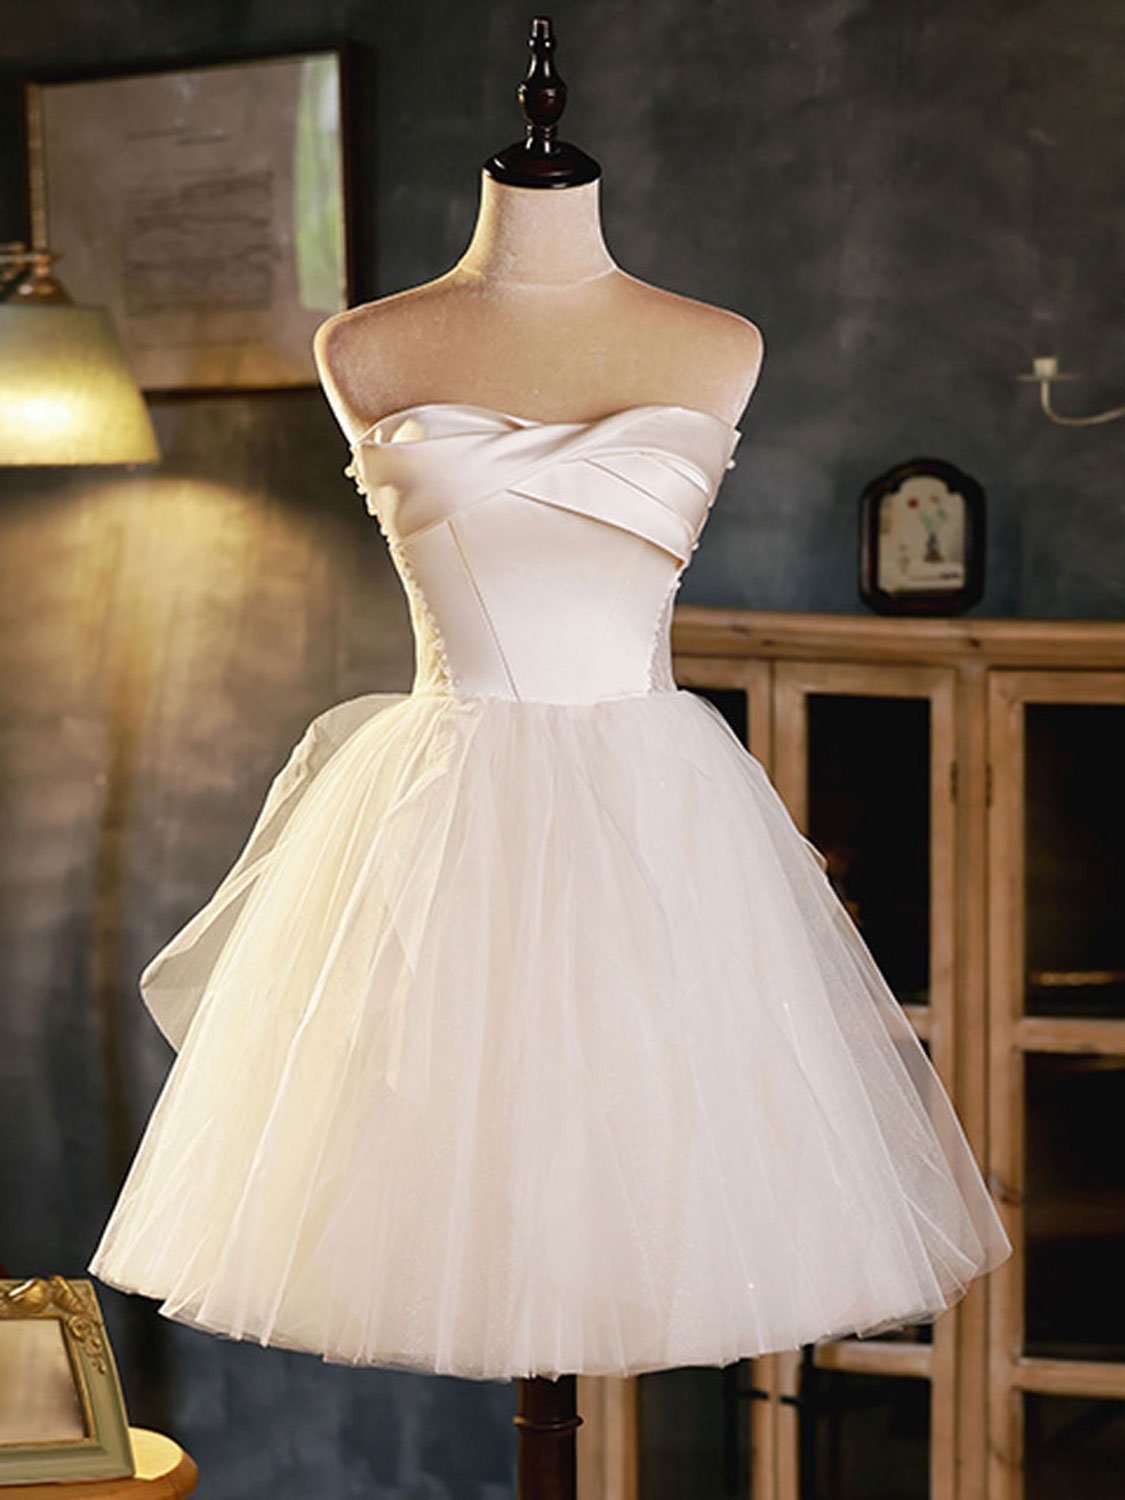 White Sweetheart Neck Tulle Short Corset Prom Dress, Light Champagne Corset Homecoming Dress outfit, Bridesmaid Dress Summer